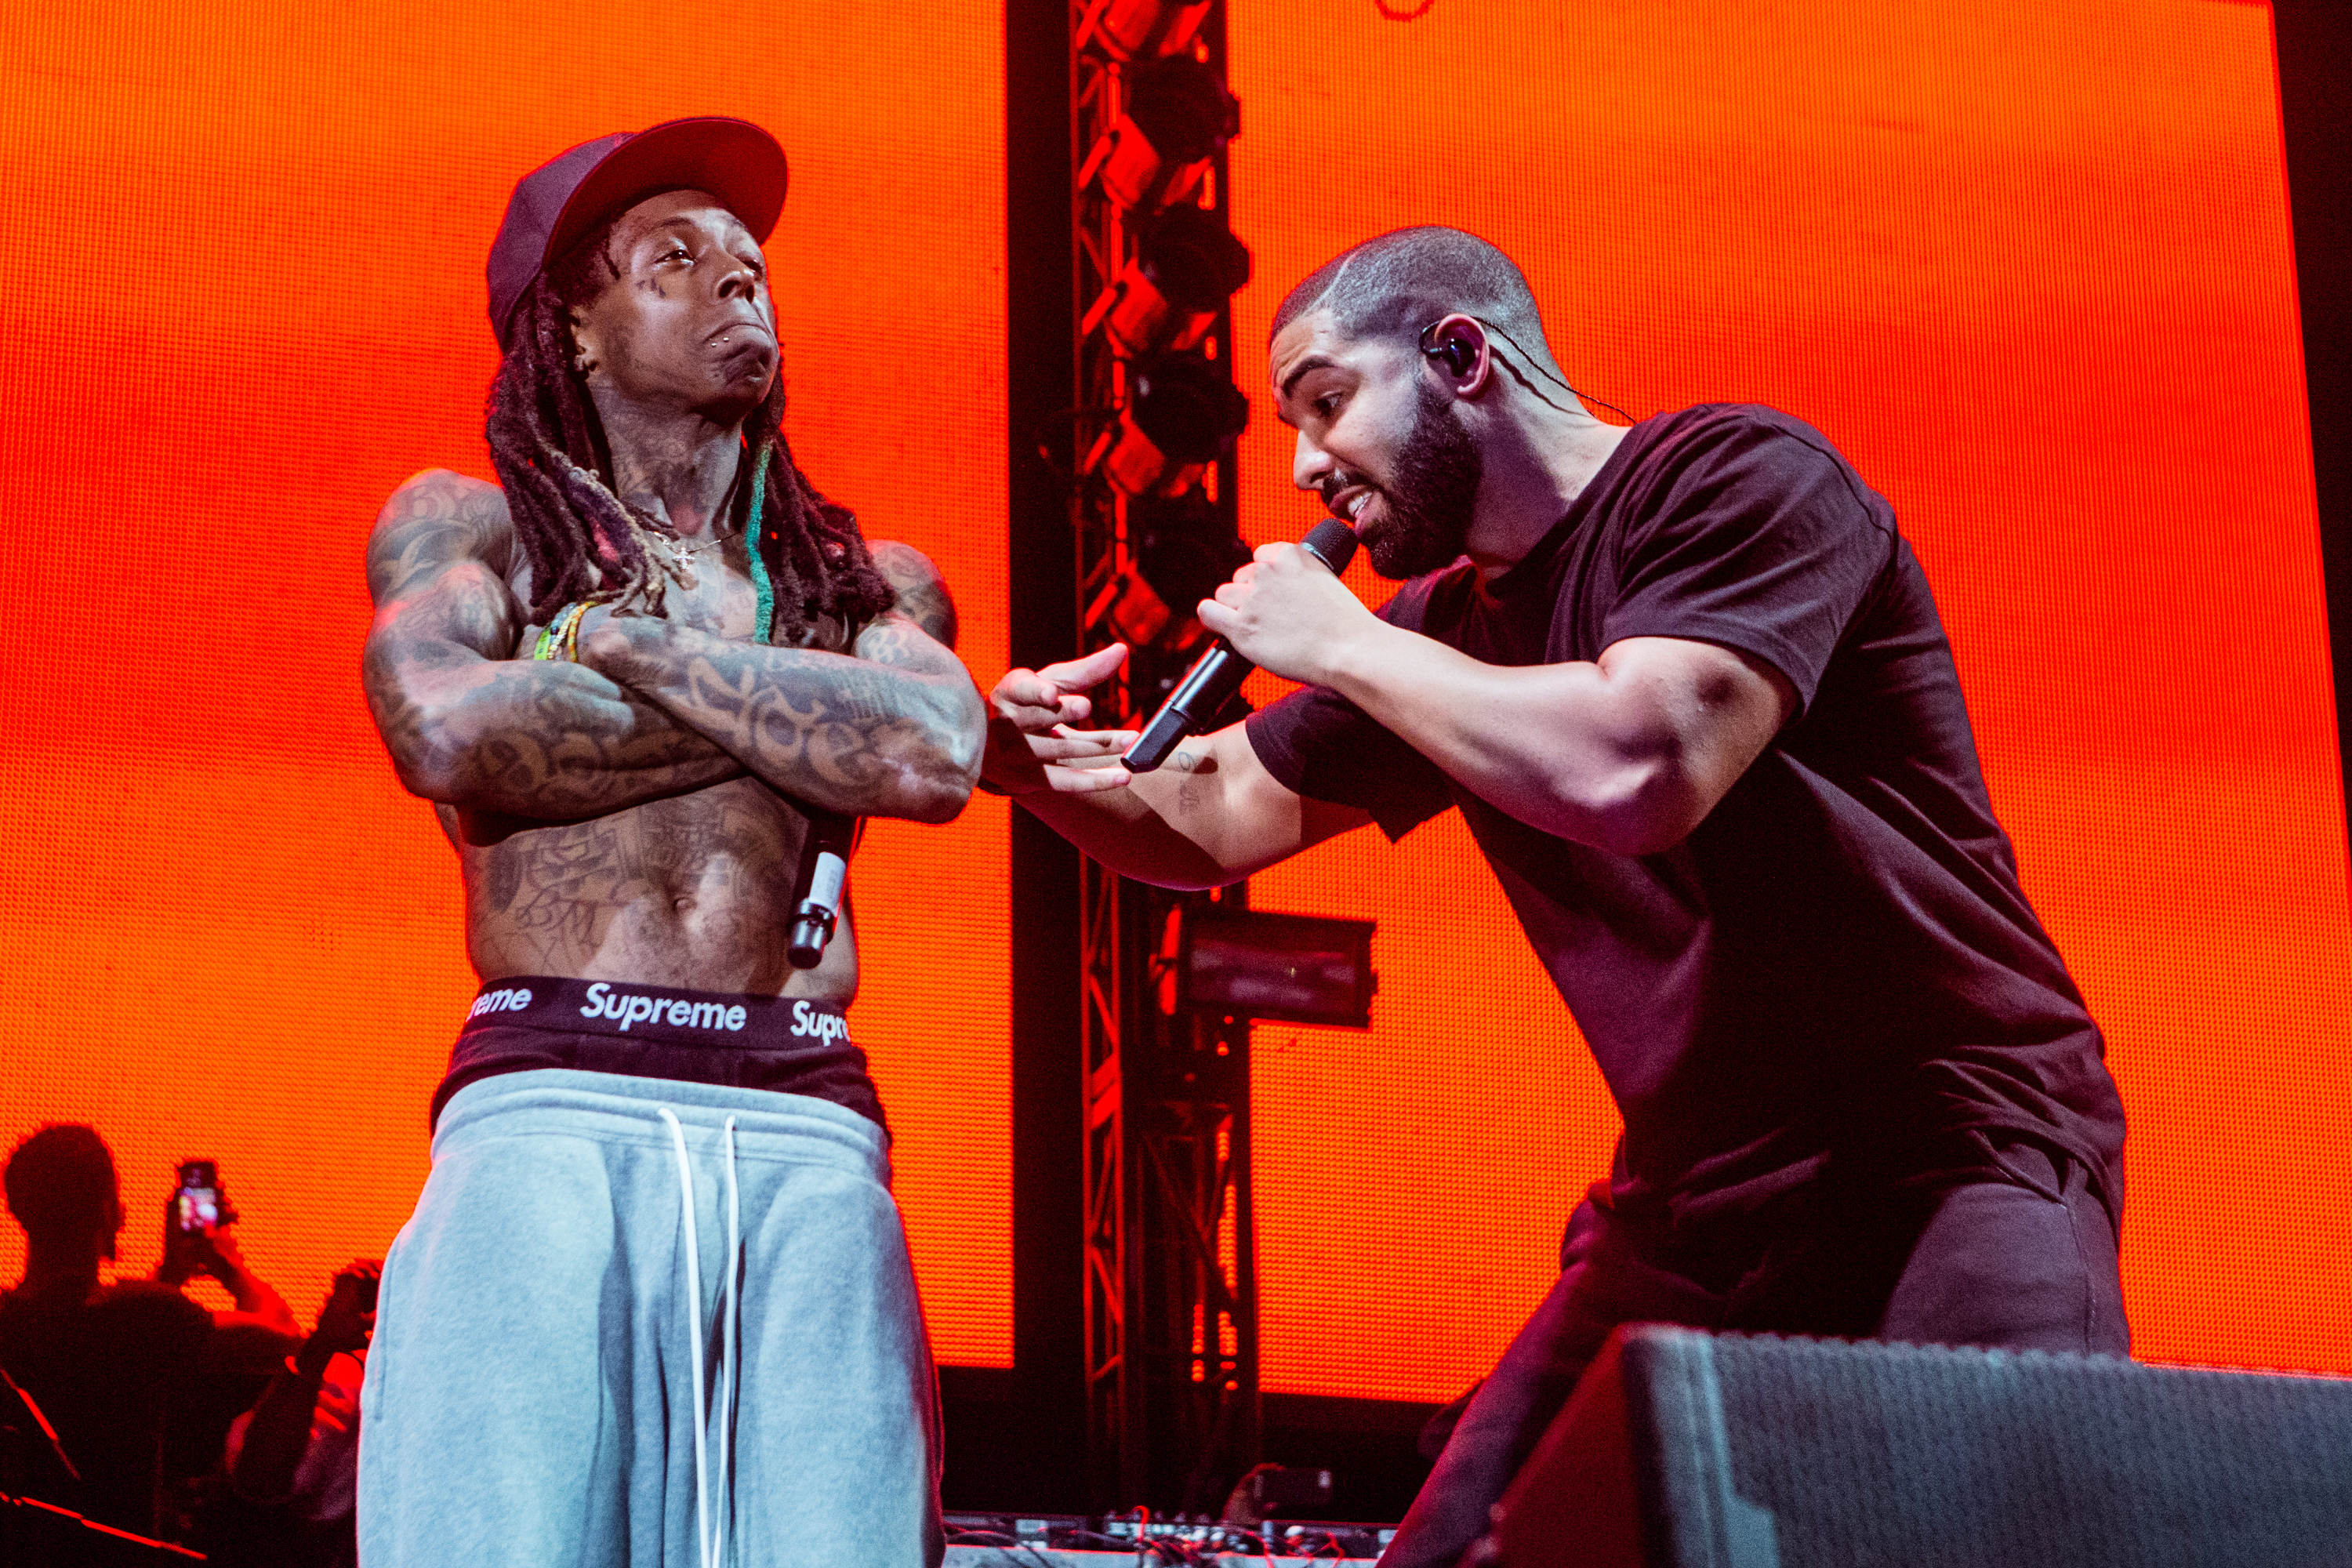 Lil Wayne and Drake perform at Lil Weezyana Festival at Champions Square on Aug. 28, 2015 in New Orleans. (Josh Brasted—WireImage/Getty Images)